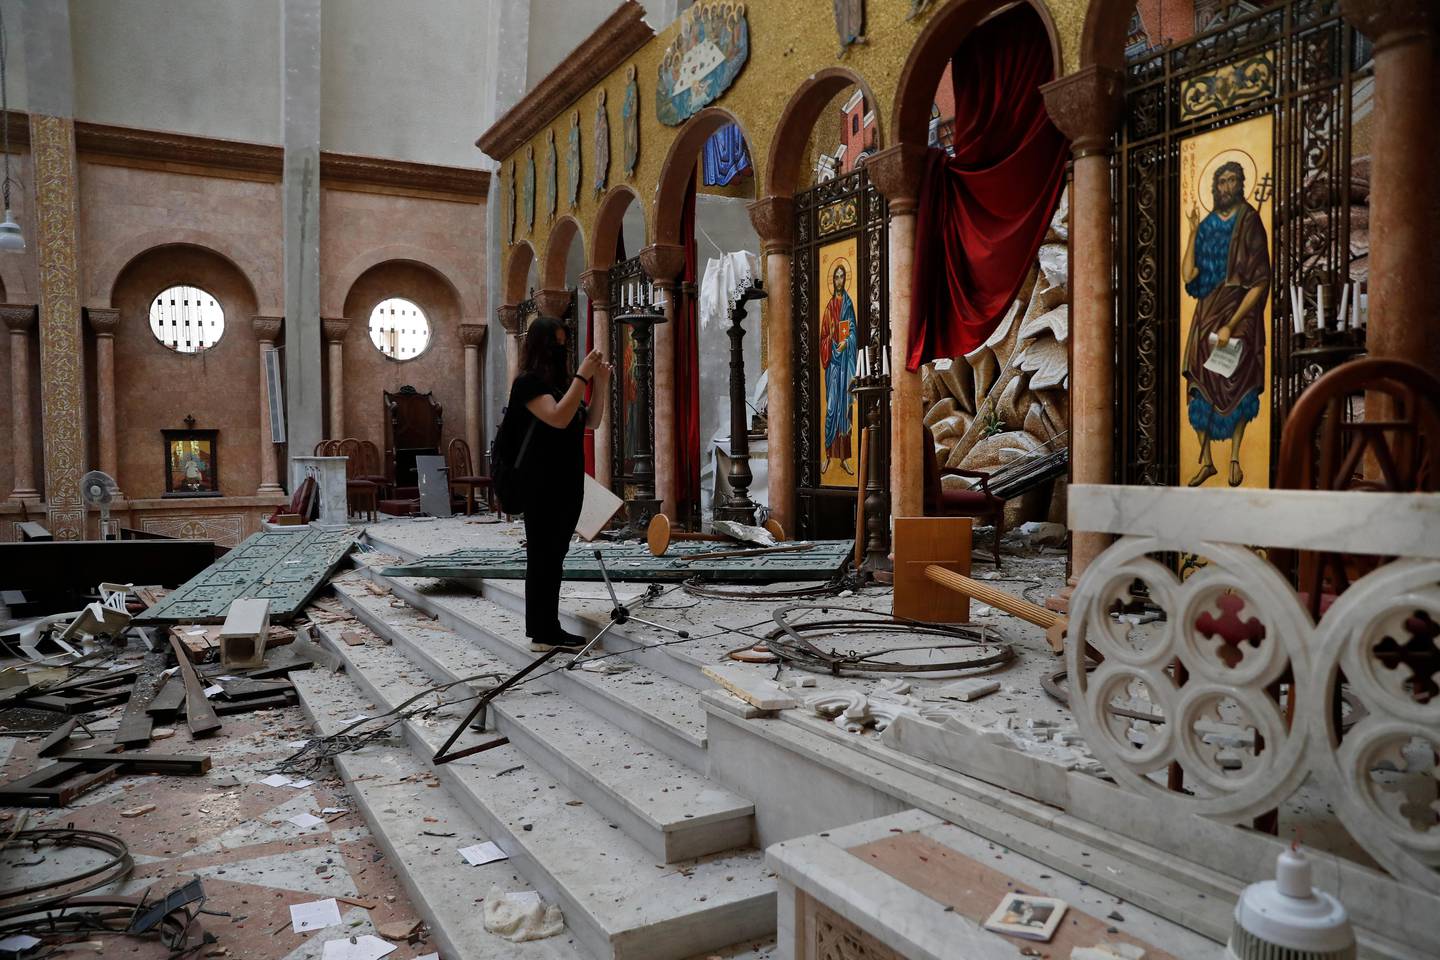 A woman takes pictures ofr a damaged church a day after an explosion hit the seaport of Beirut, Lebanon, Wednesday, Aug. 5, 2020. Residents of Beirut awoke to a scene of utter devastation on Wednesday, a day after a massive explosion at the port sent shock waves across the Lebanese capital, killing at least 100 people and wounding thousands. (AP Photo/Hussein Malla)